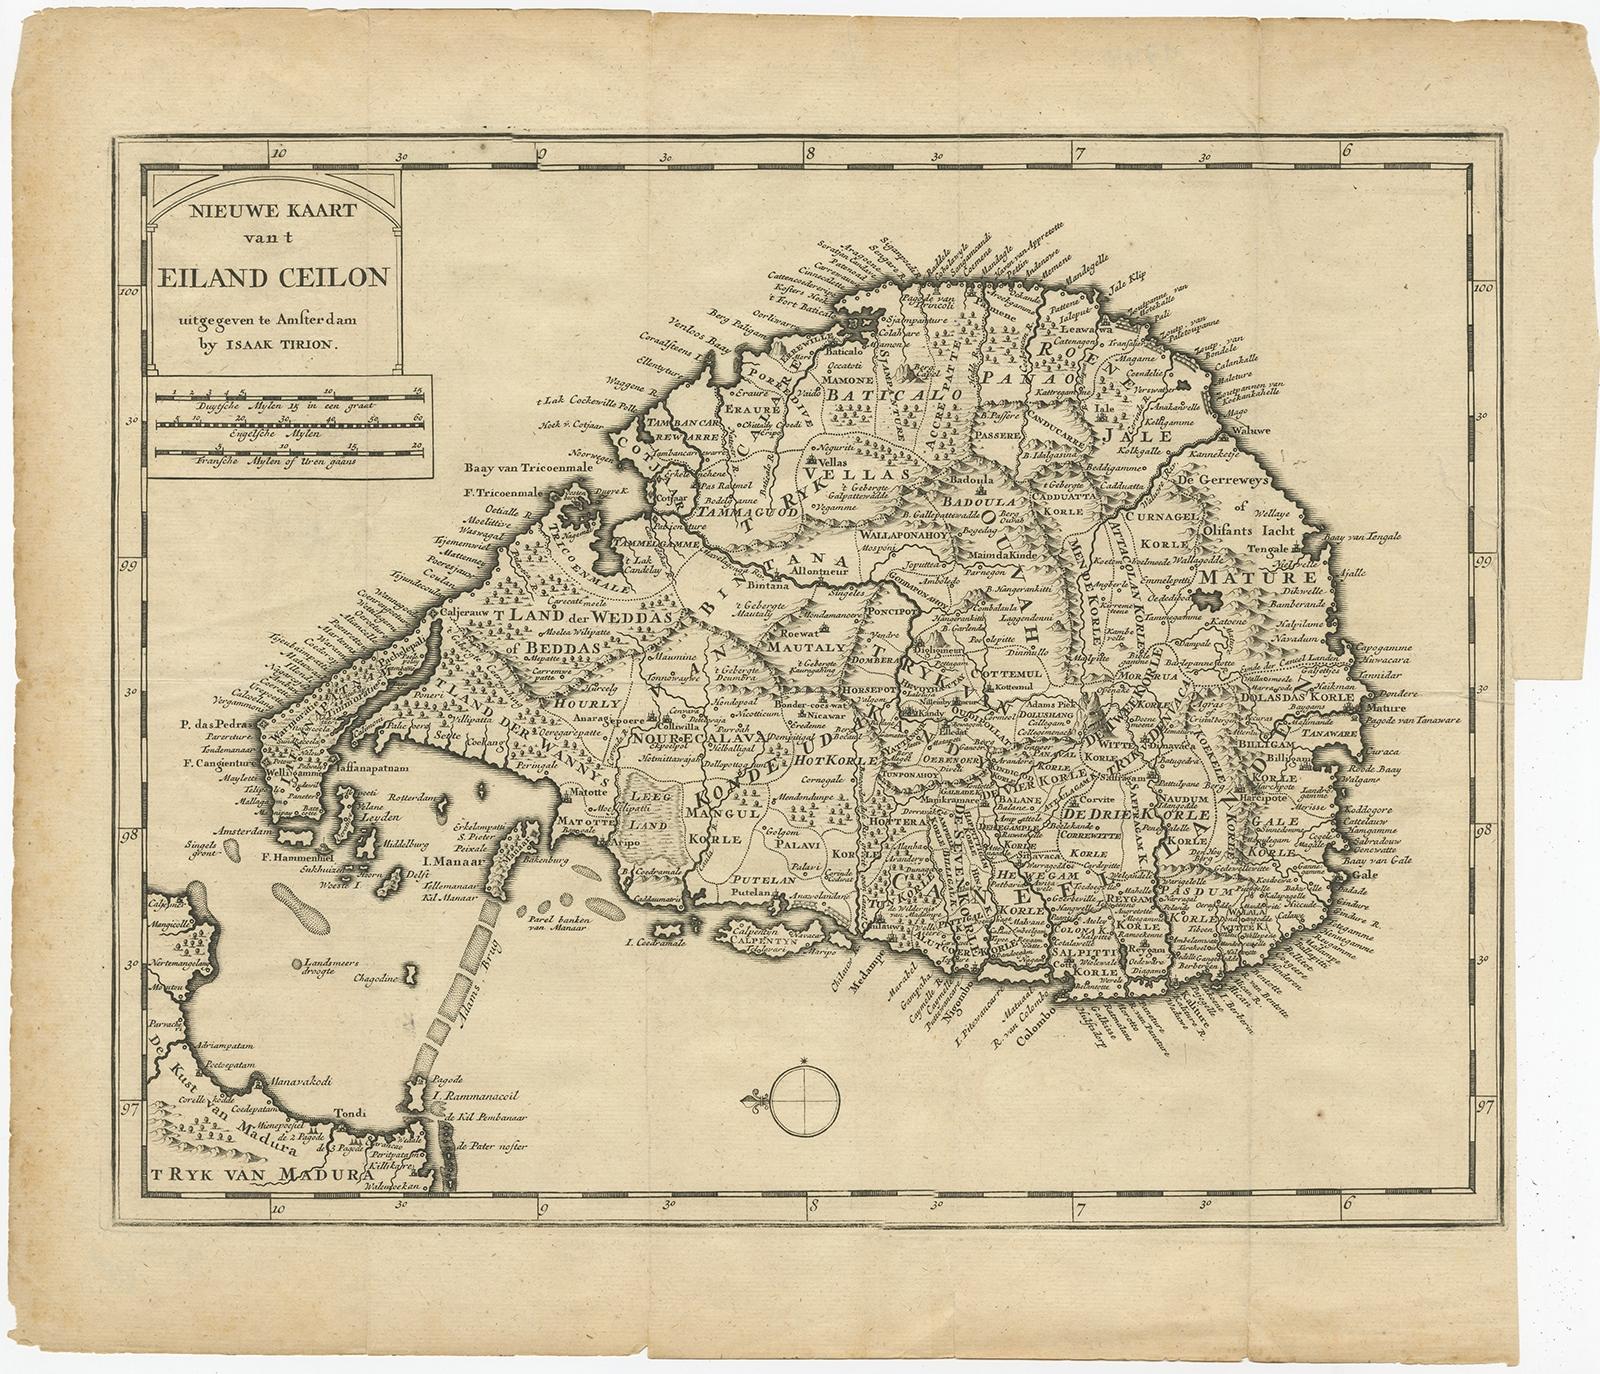 Description: Antique map Ceylon titled 'Nieuwe Kaart van t Eland Ceilon'. 

Old map of present-day Sri Lanka with north oriented to the left. The legendary Adams Brug (Adam's Bridge or Rama's Bridge) is clearly shown linking Mannar island off Sri